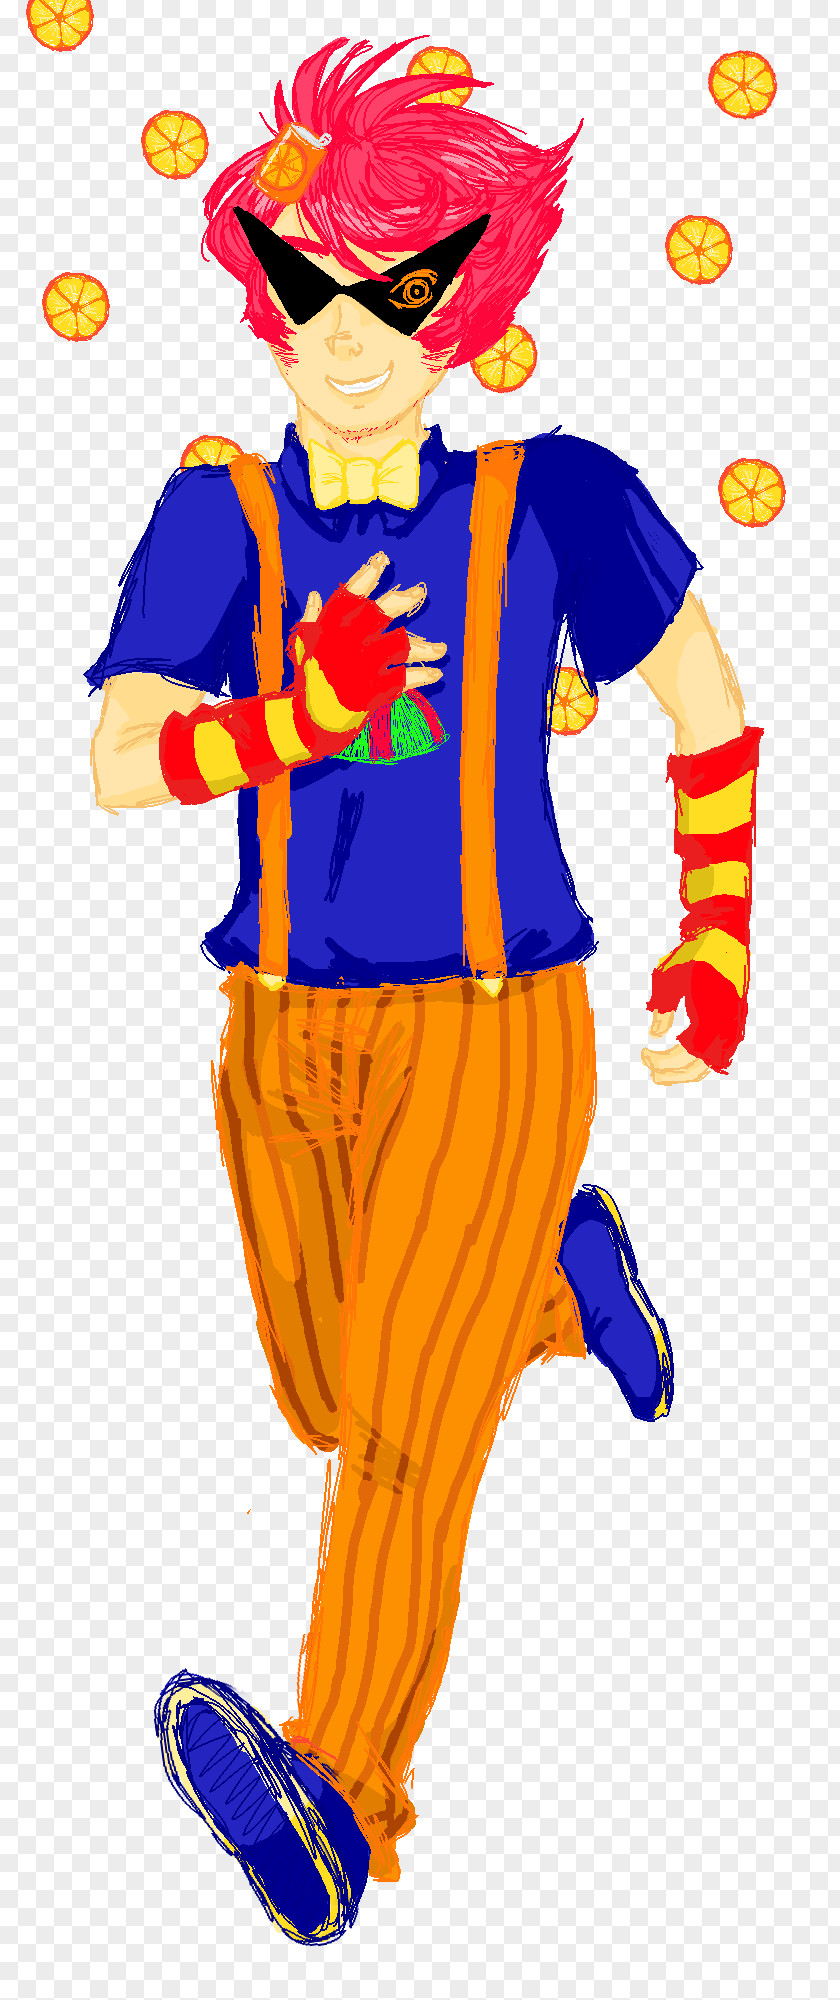 Funny Air Conditioning Artist Clown Costume Mascot PNG